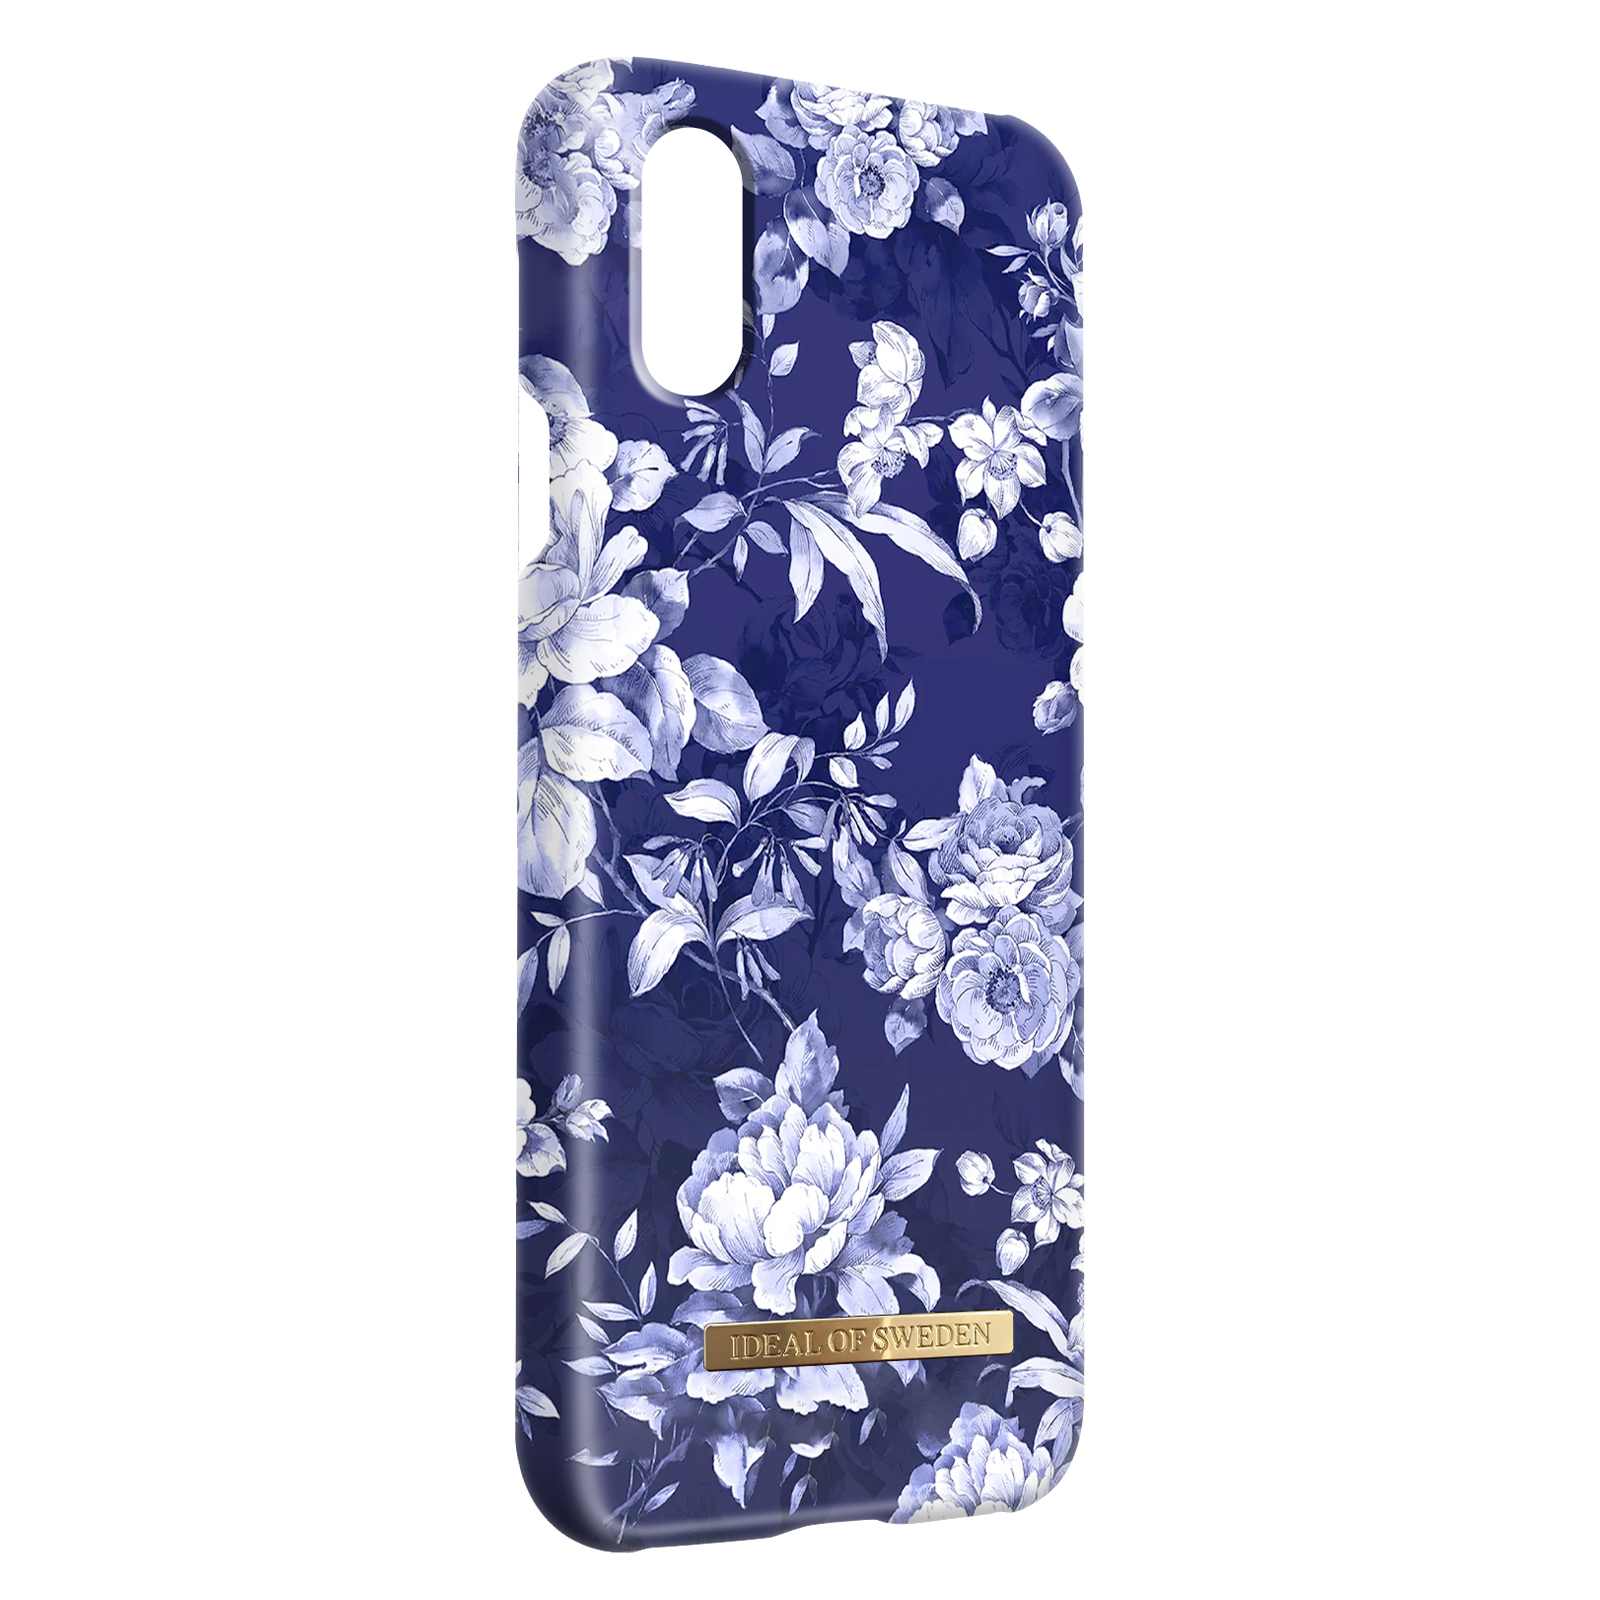 IDEAL OF Apple, Blue Blau Hülle Series, Max, Bloom Sailor SWEDEN iPhone Backcover, XS